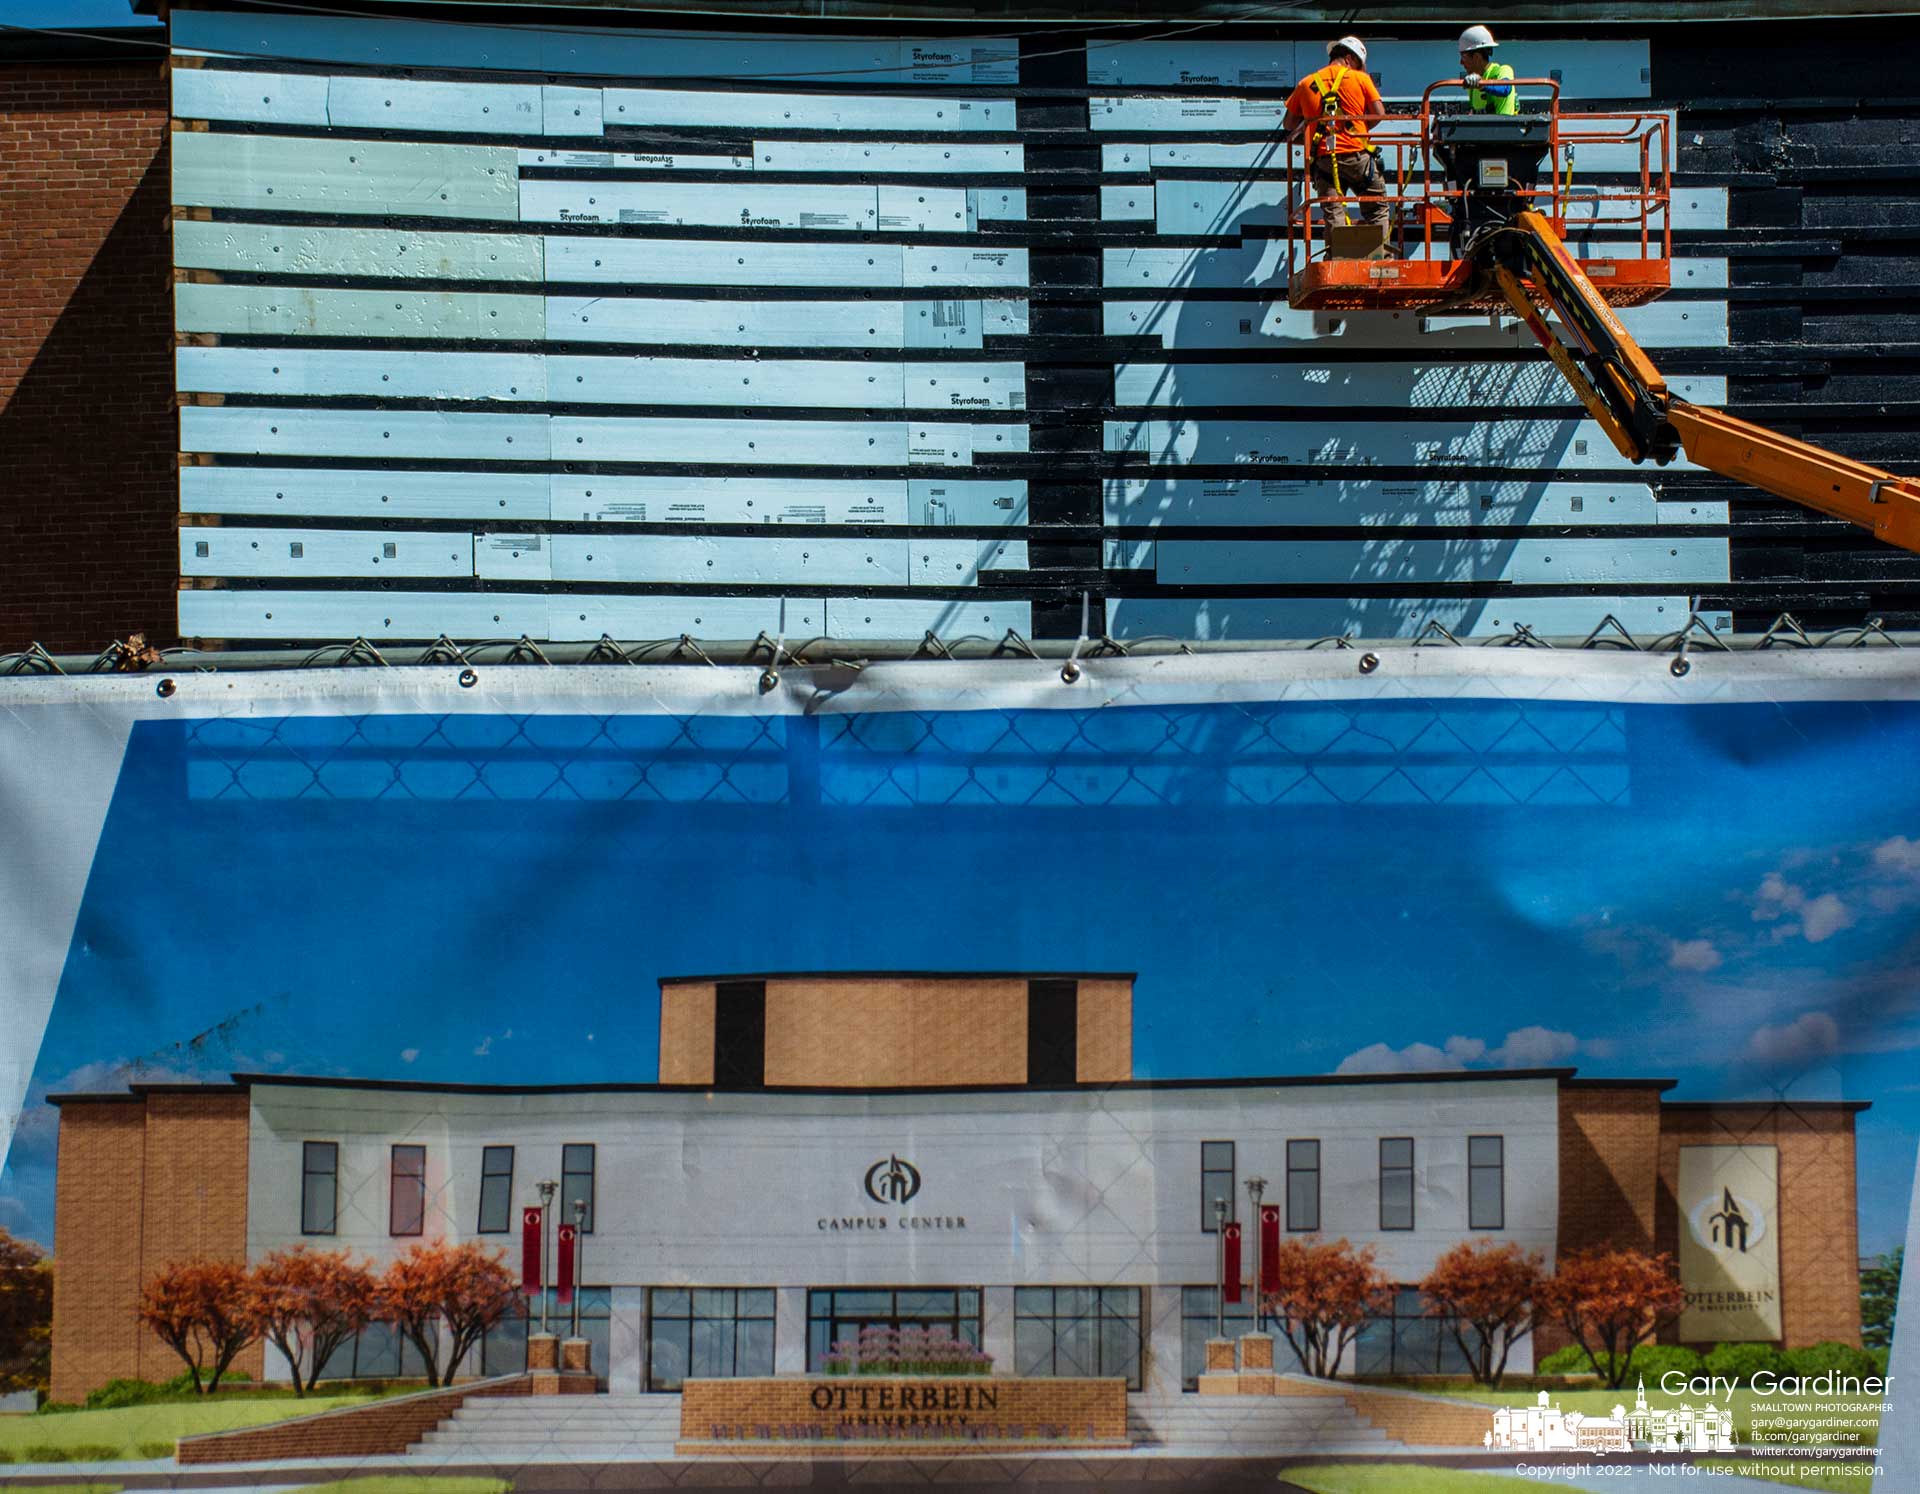 Workers apply sheathing to the facade of the student center at Otterbein University transforming the original look into a more contemporary style matching the banner that hangs on a fence at the front of the building. My Final Photo for June 28, 2022.